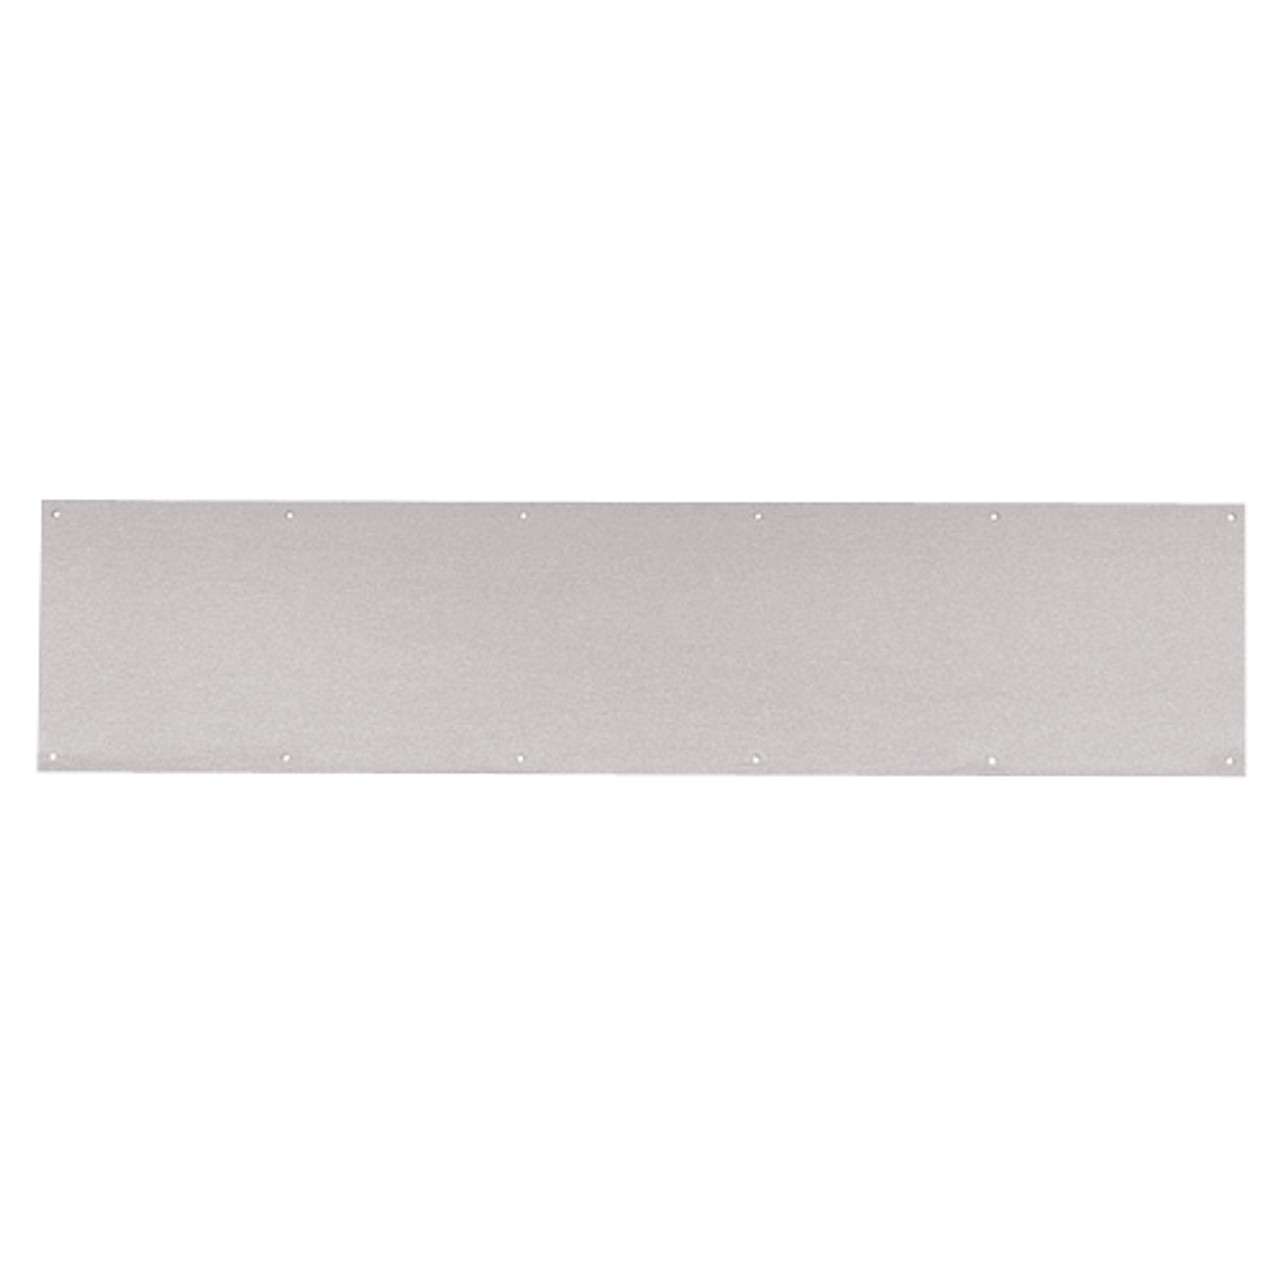 8400-US32D-30x40.5-B-CS Ives 8400 Series Protection Plate in Satin Stainless Steel